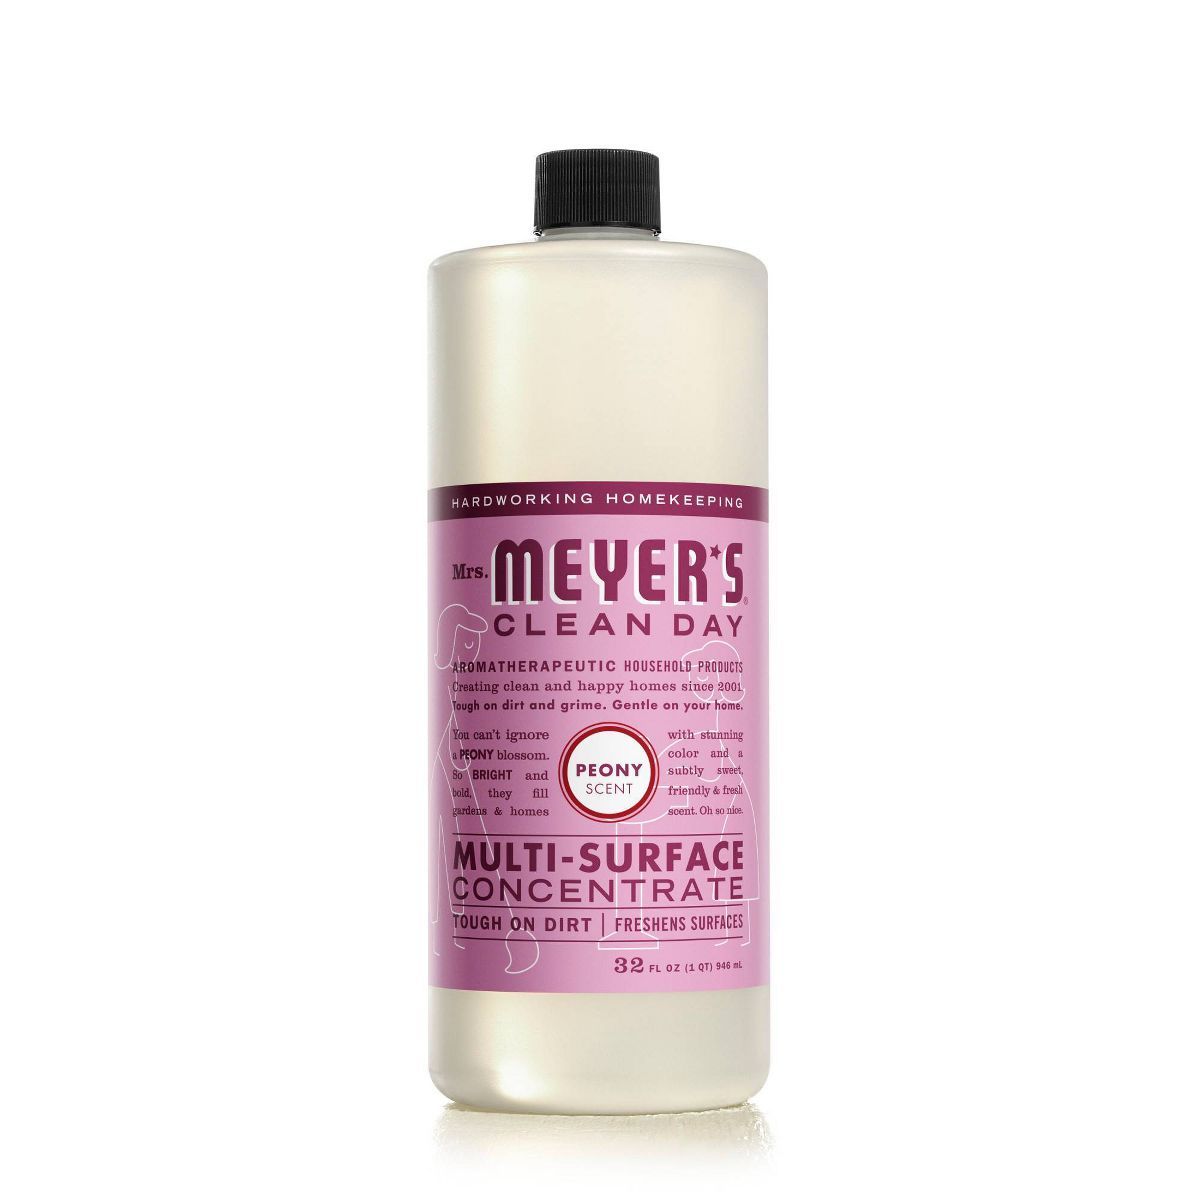 Mrs. Meyer's Clean Day Peony Concentrated Cleaner - 32 fl oz | Target